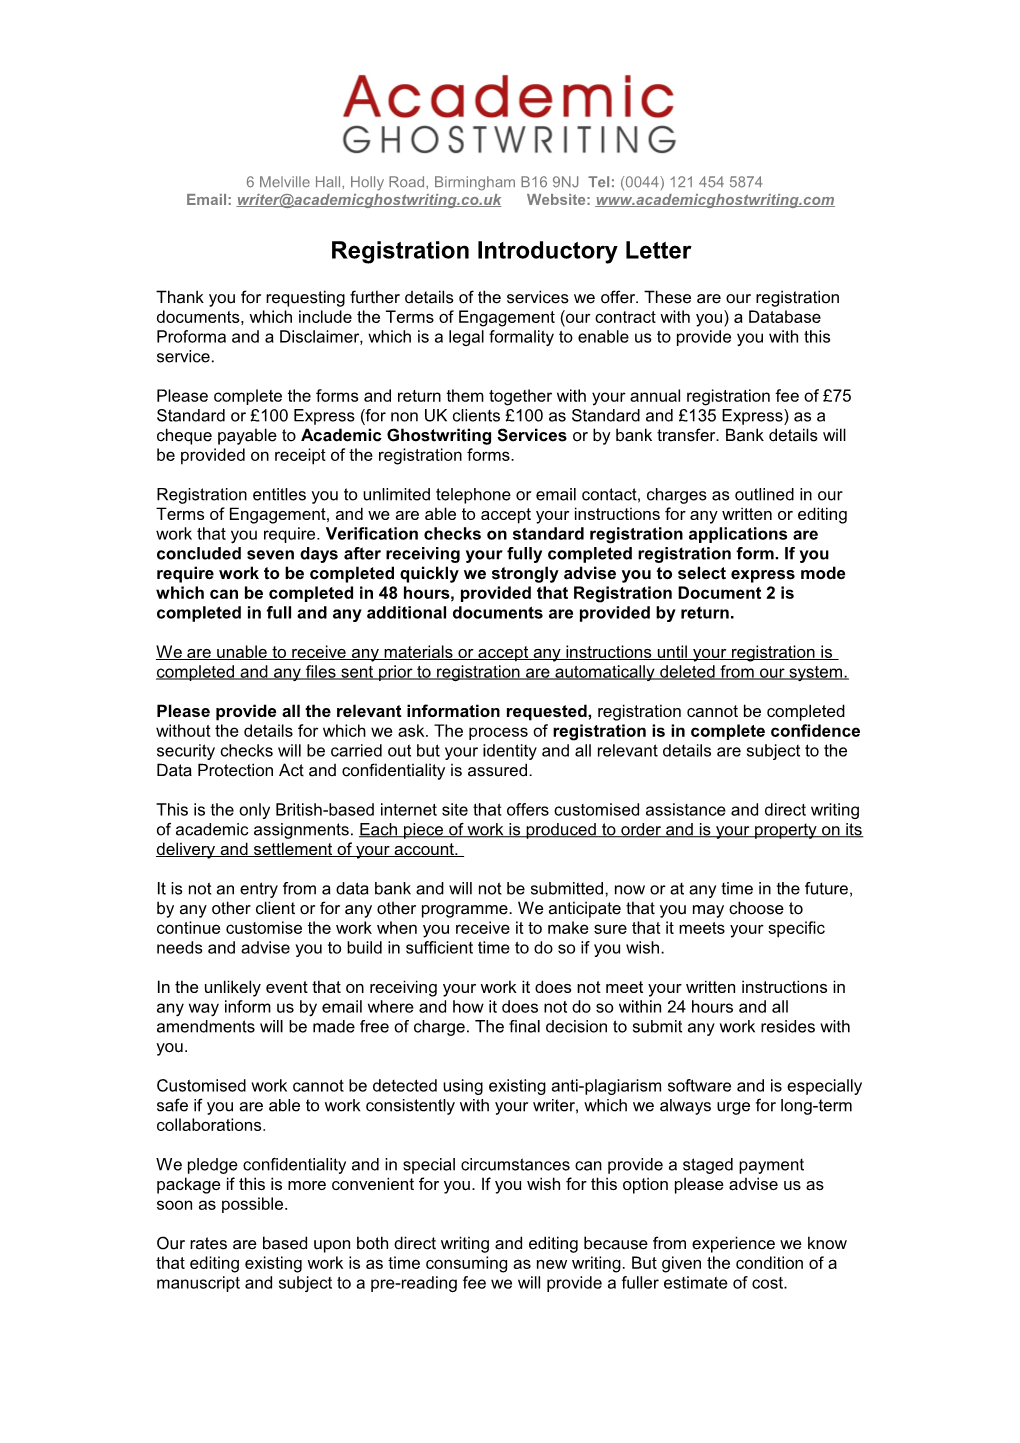 Registration Introductory Letter